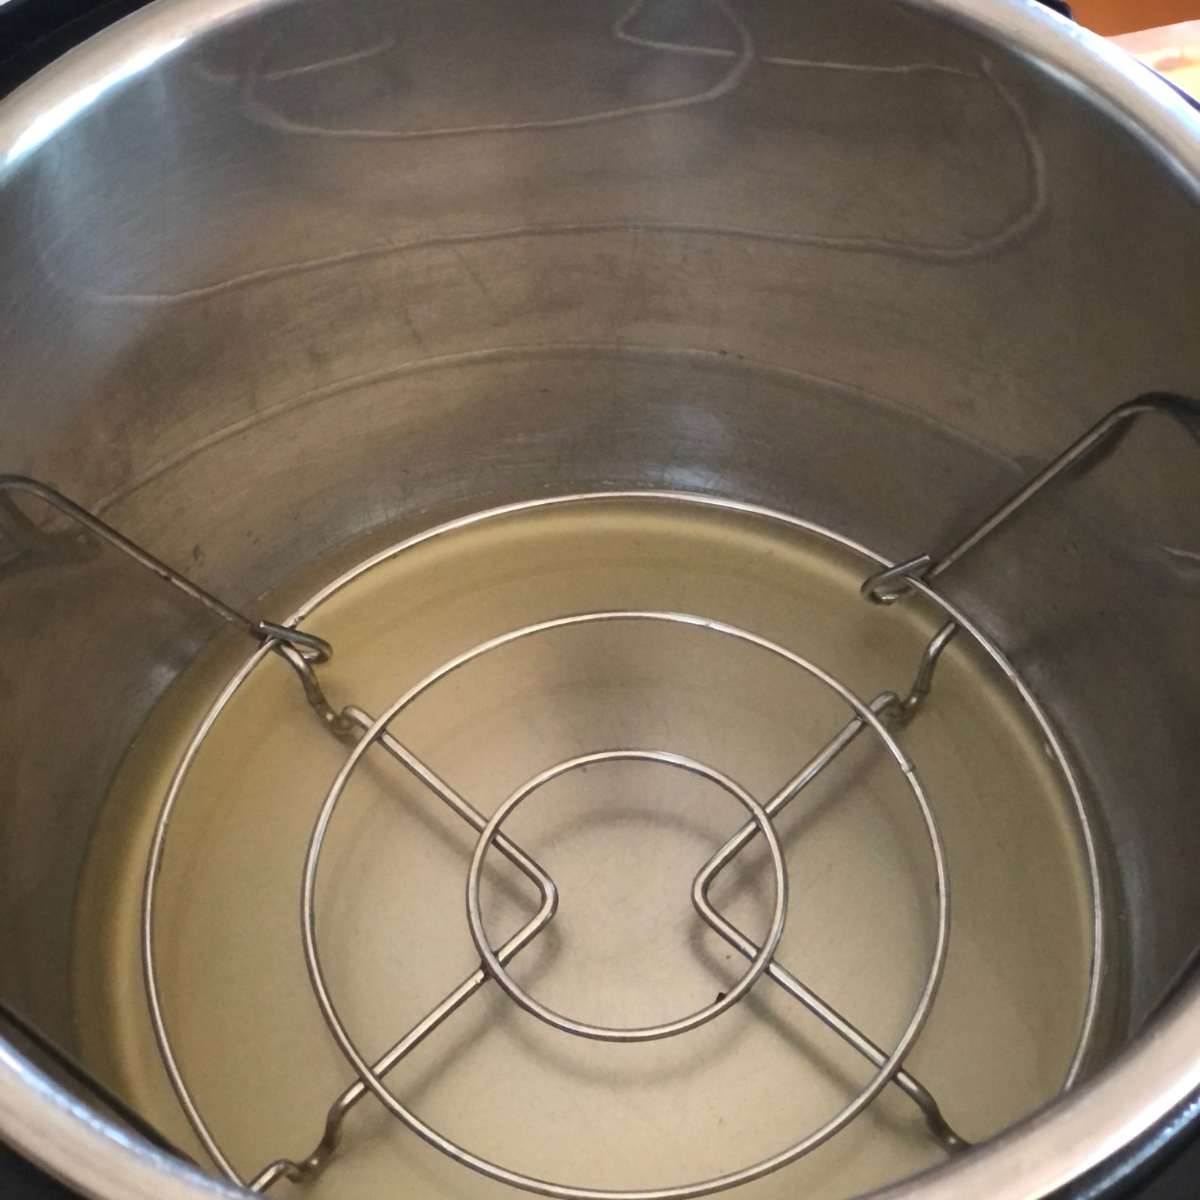 A pressure cooker pot with chicken broth and the trivet inside.